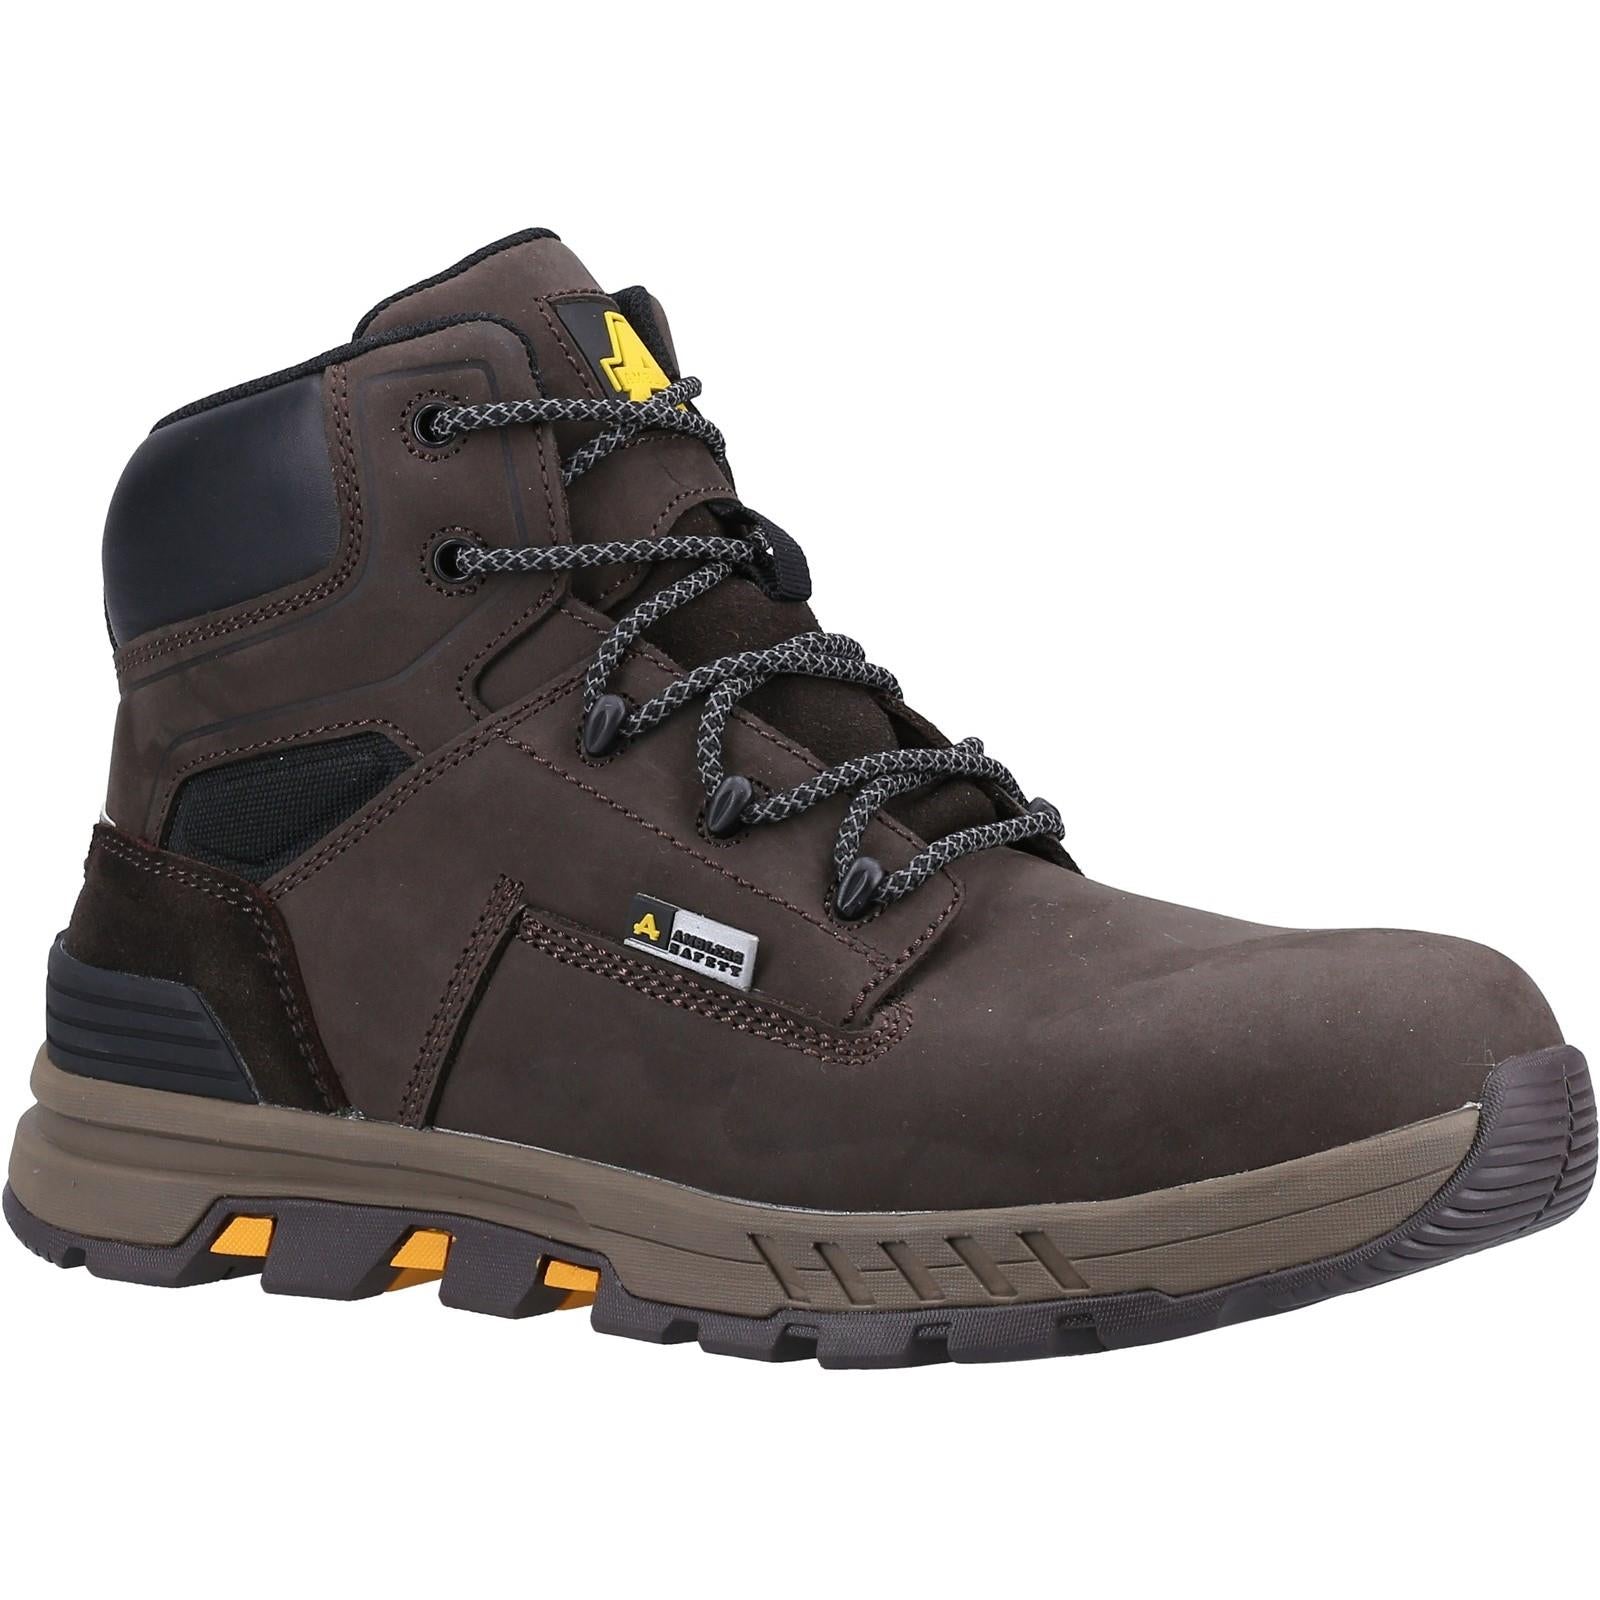 Amblers AS261 Crane S3 brown steel toe composite midsole work safety boots